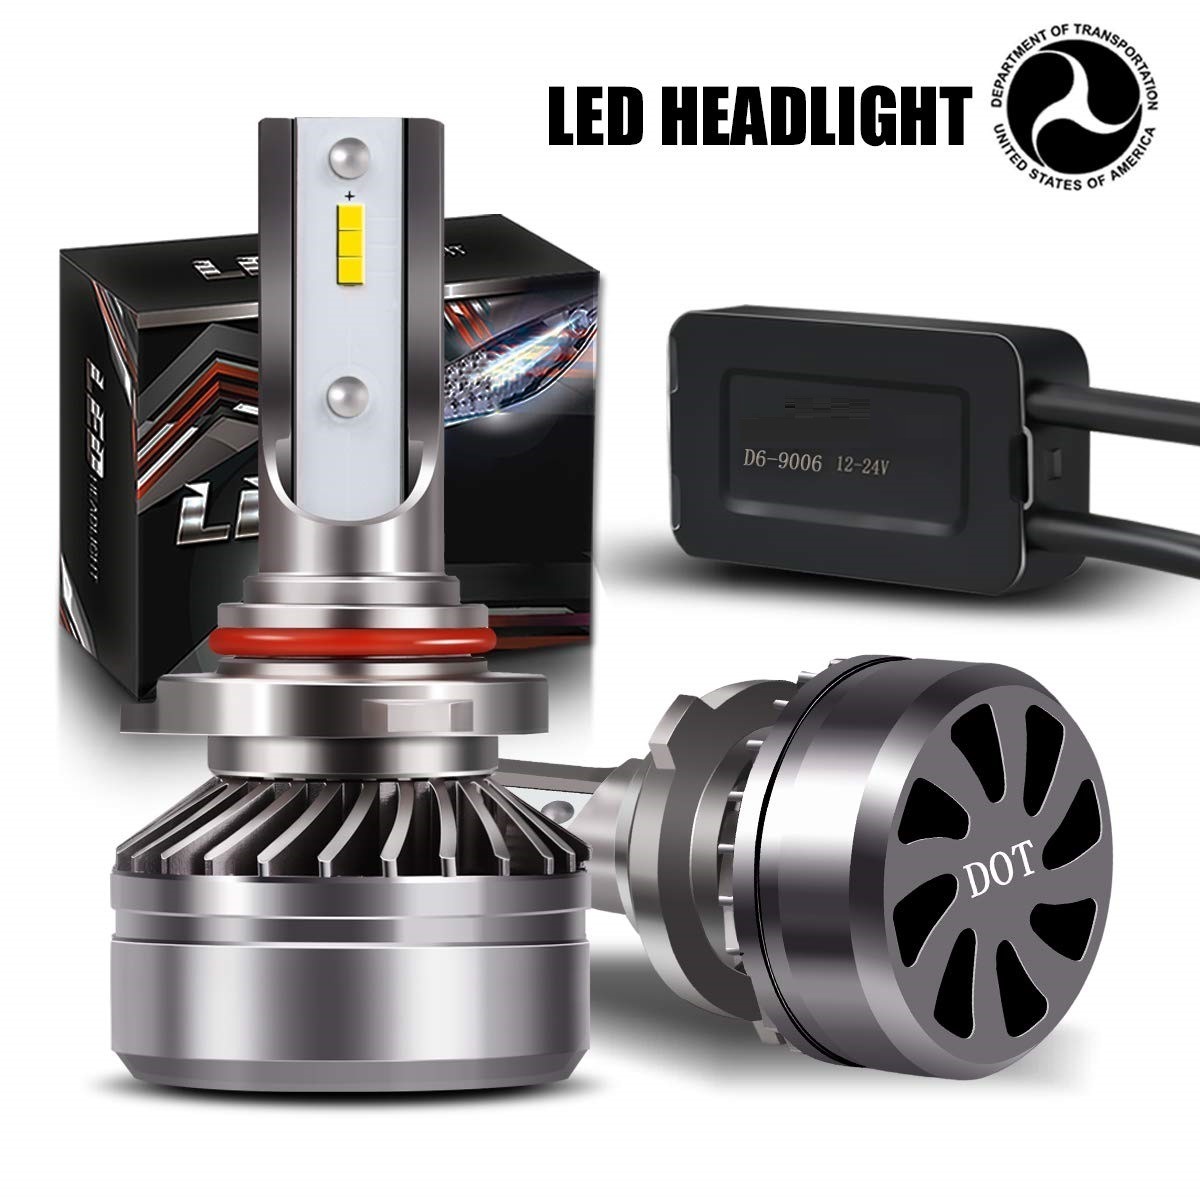 DOT Approved LED Headlight Bulbs Conversion Kit, 6000LM 6000K Cool White